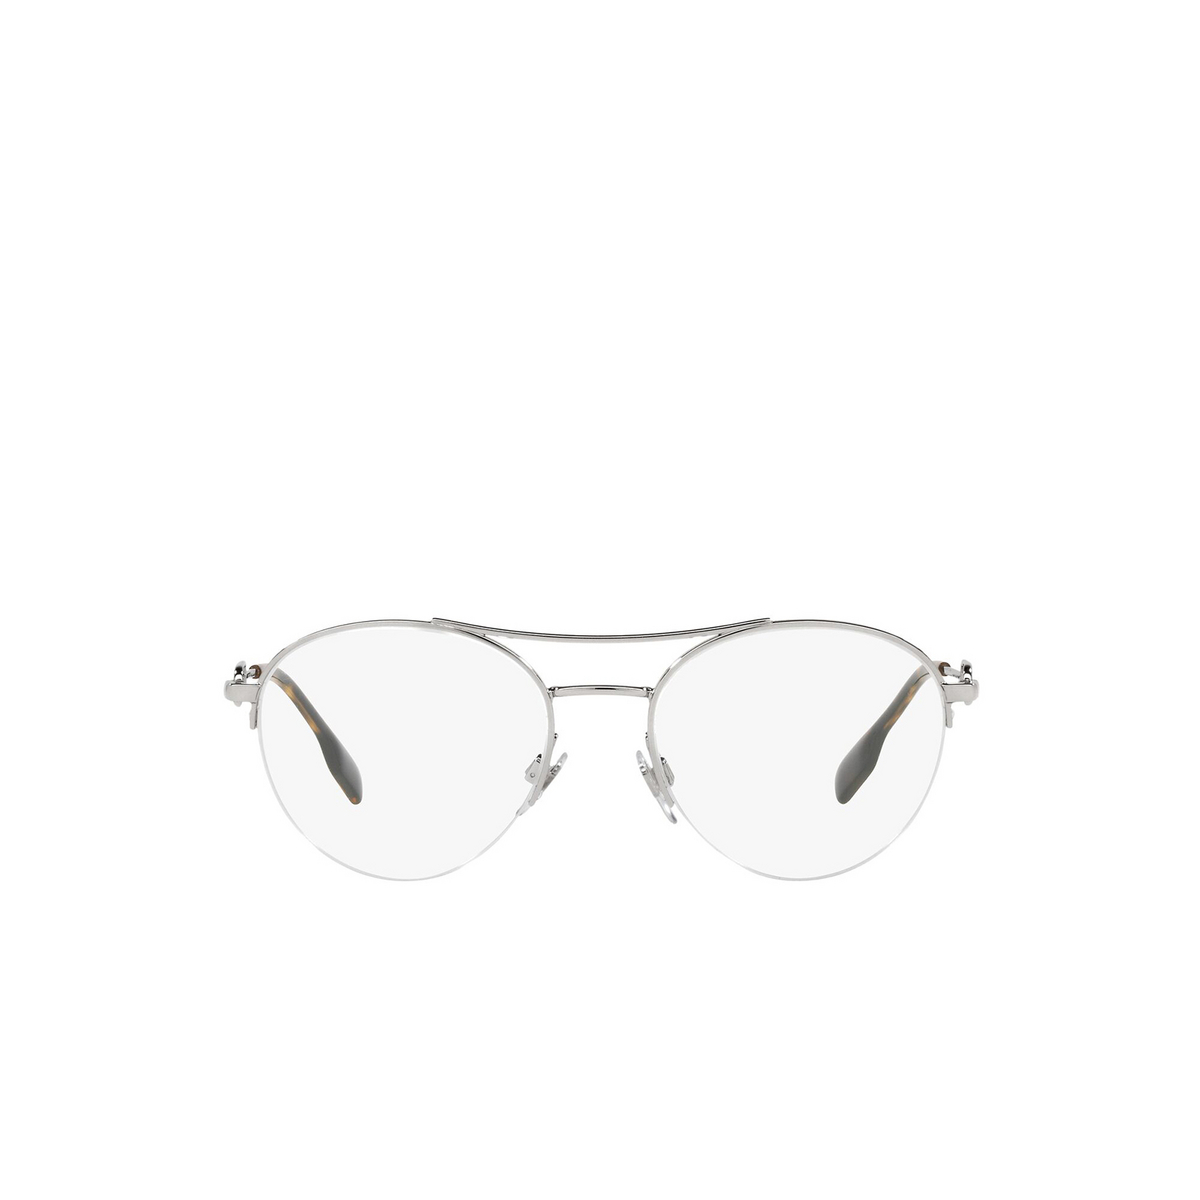 Burberry MARTHA Eyeglasses 1005 Silver - front view